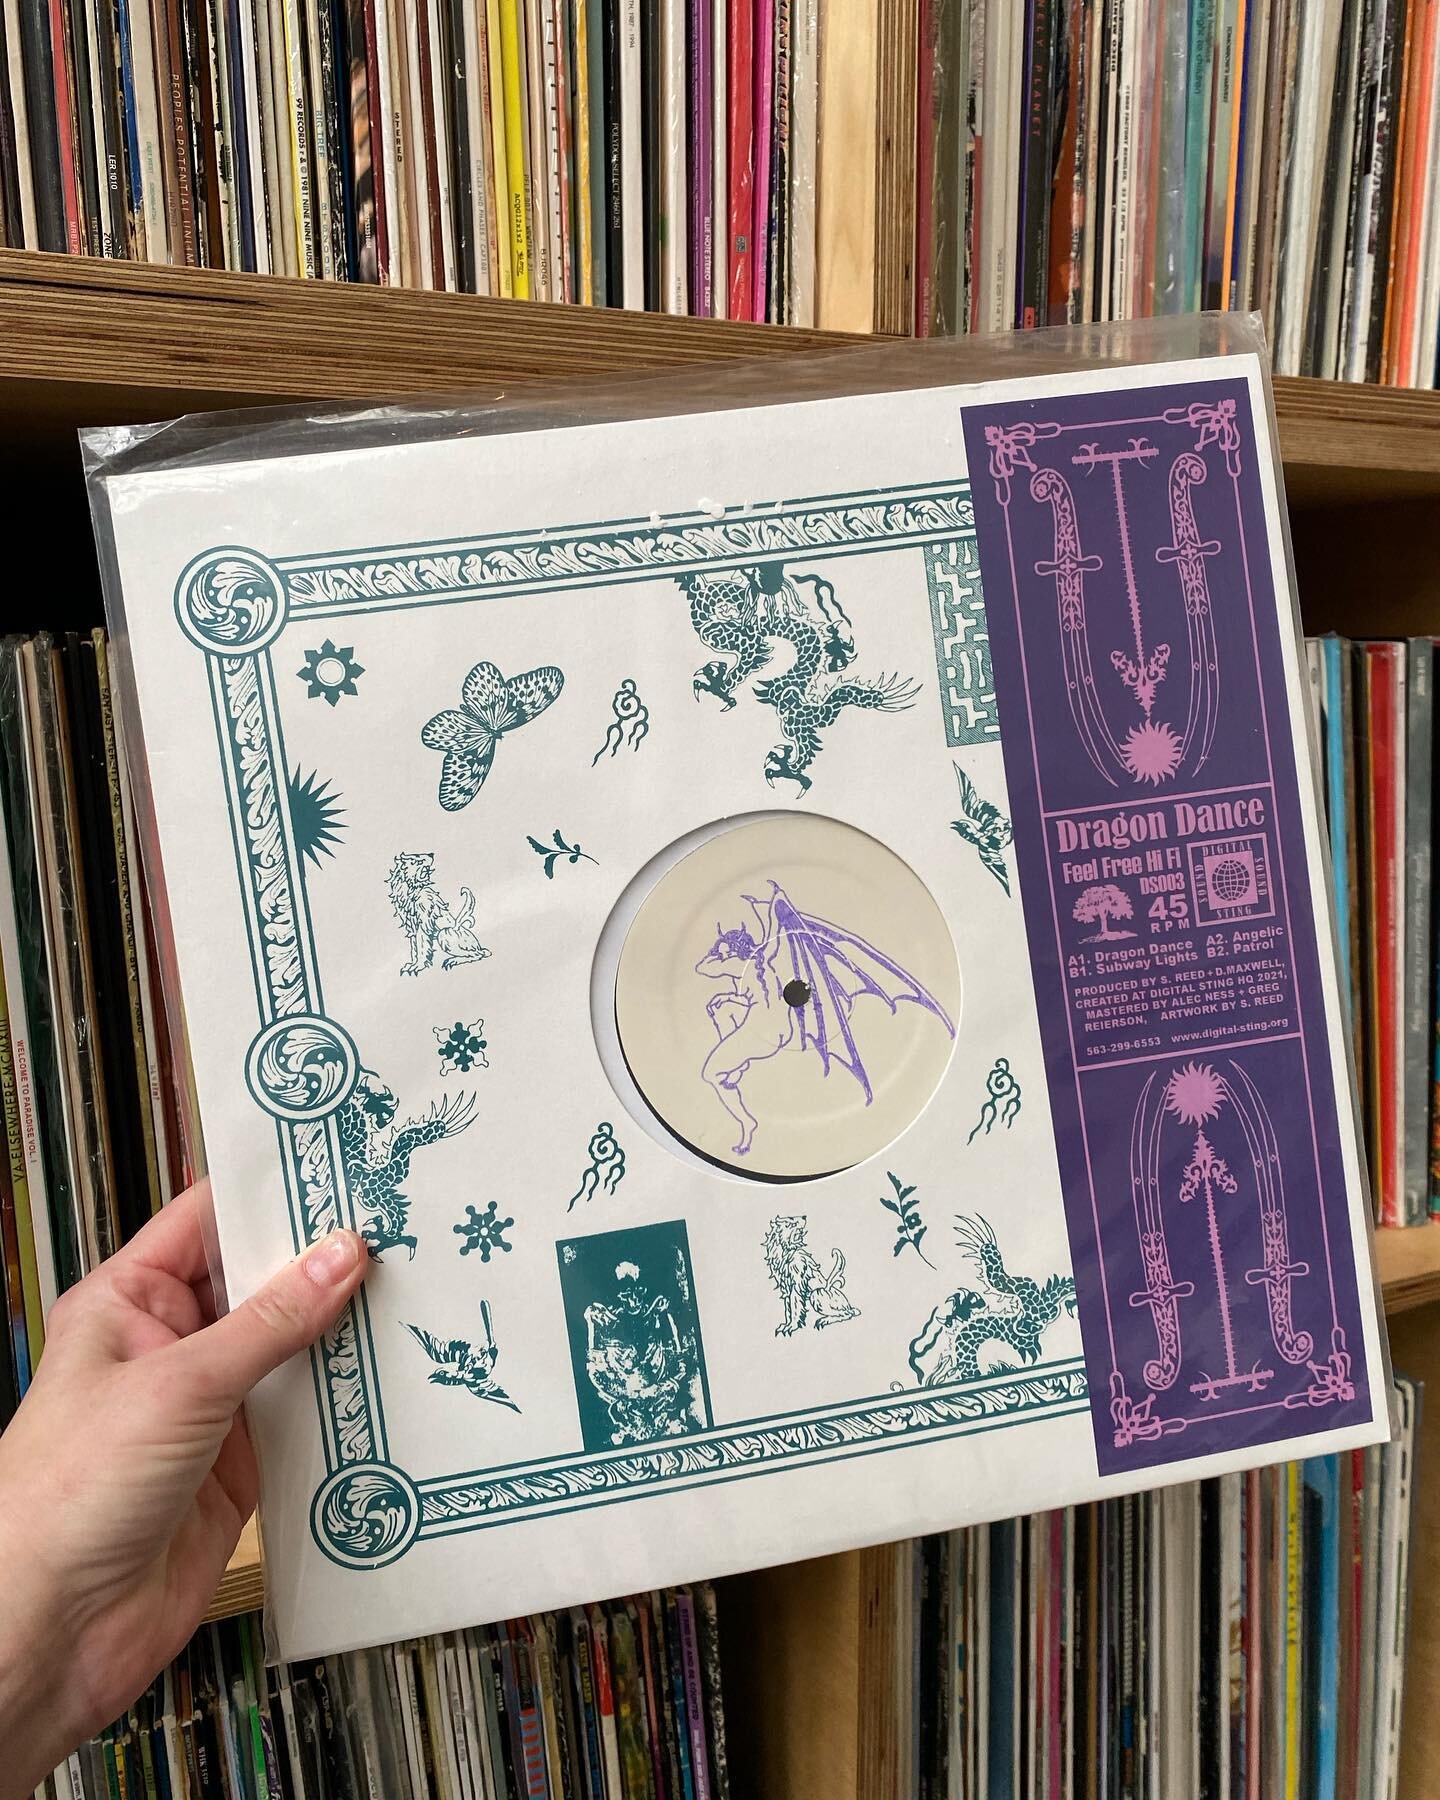 Sunday dub day.

Dystopian industrial digi dub 4 tracker from the Twin Cities @feelfreehifi with beautiful screen printed sleeve. TIP! 🔥

Open 1-5pm at @bananablockofficial, @eastblockbazaar food market on in the main space so come feed your face.